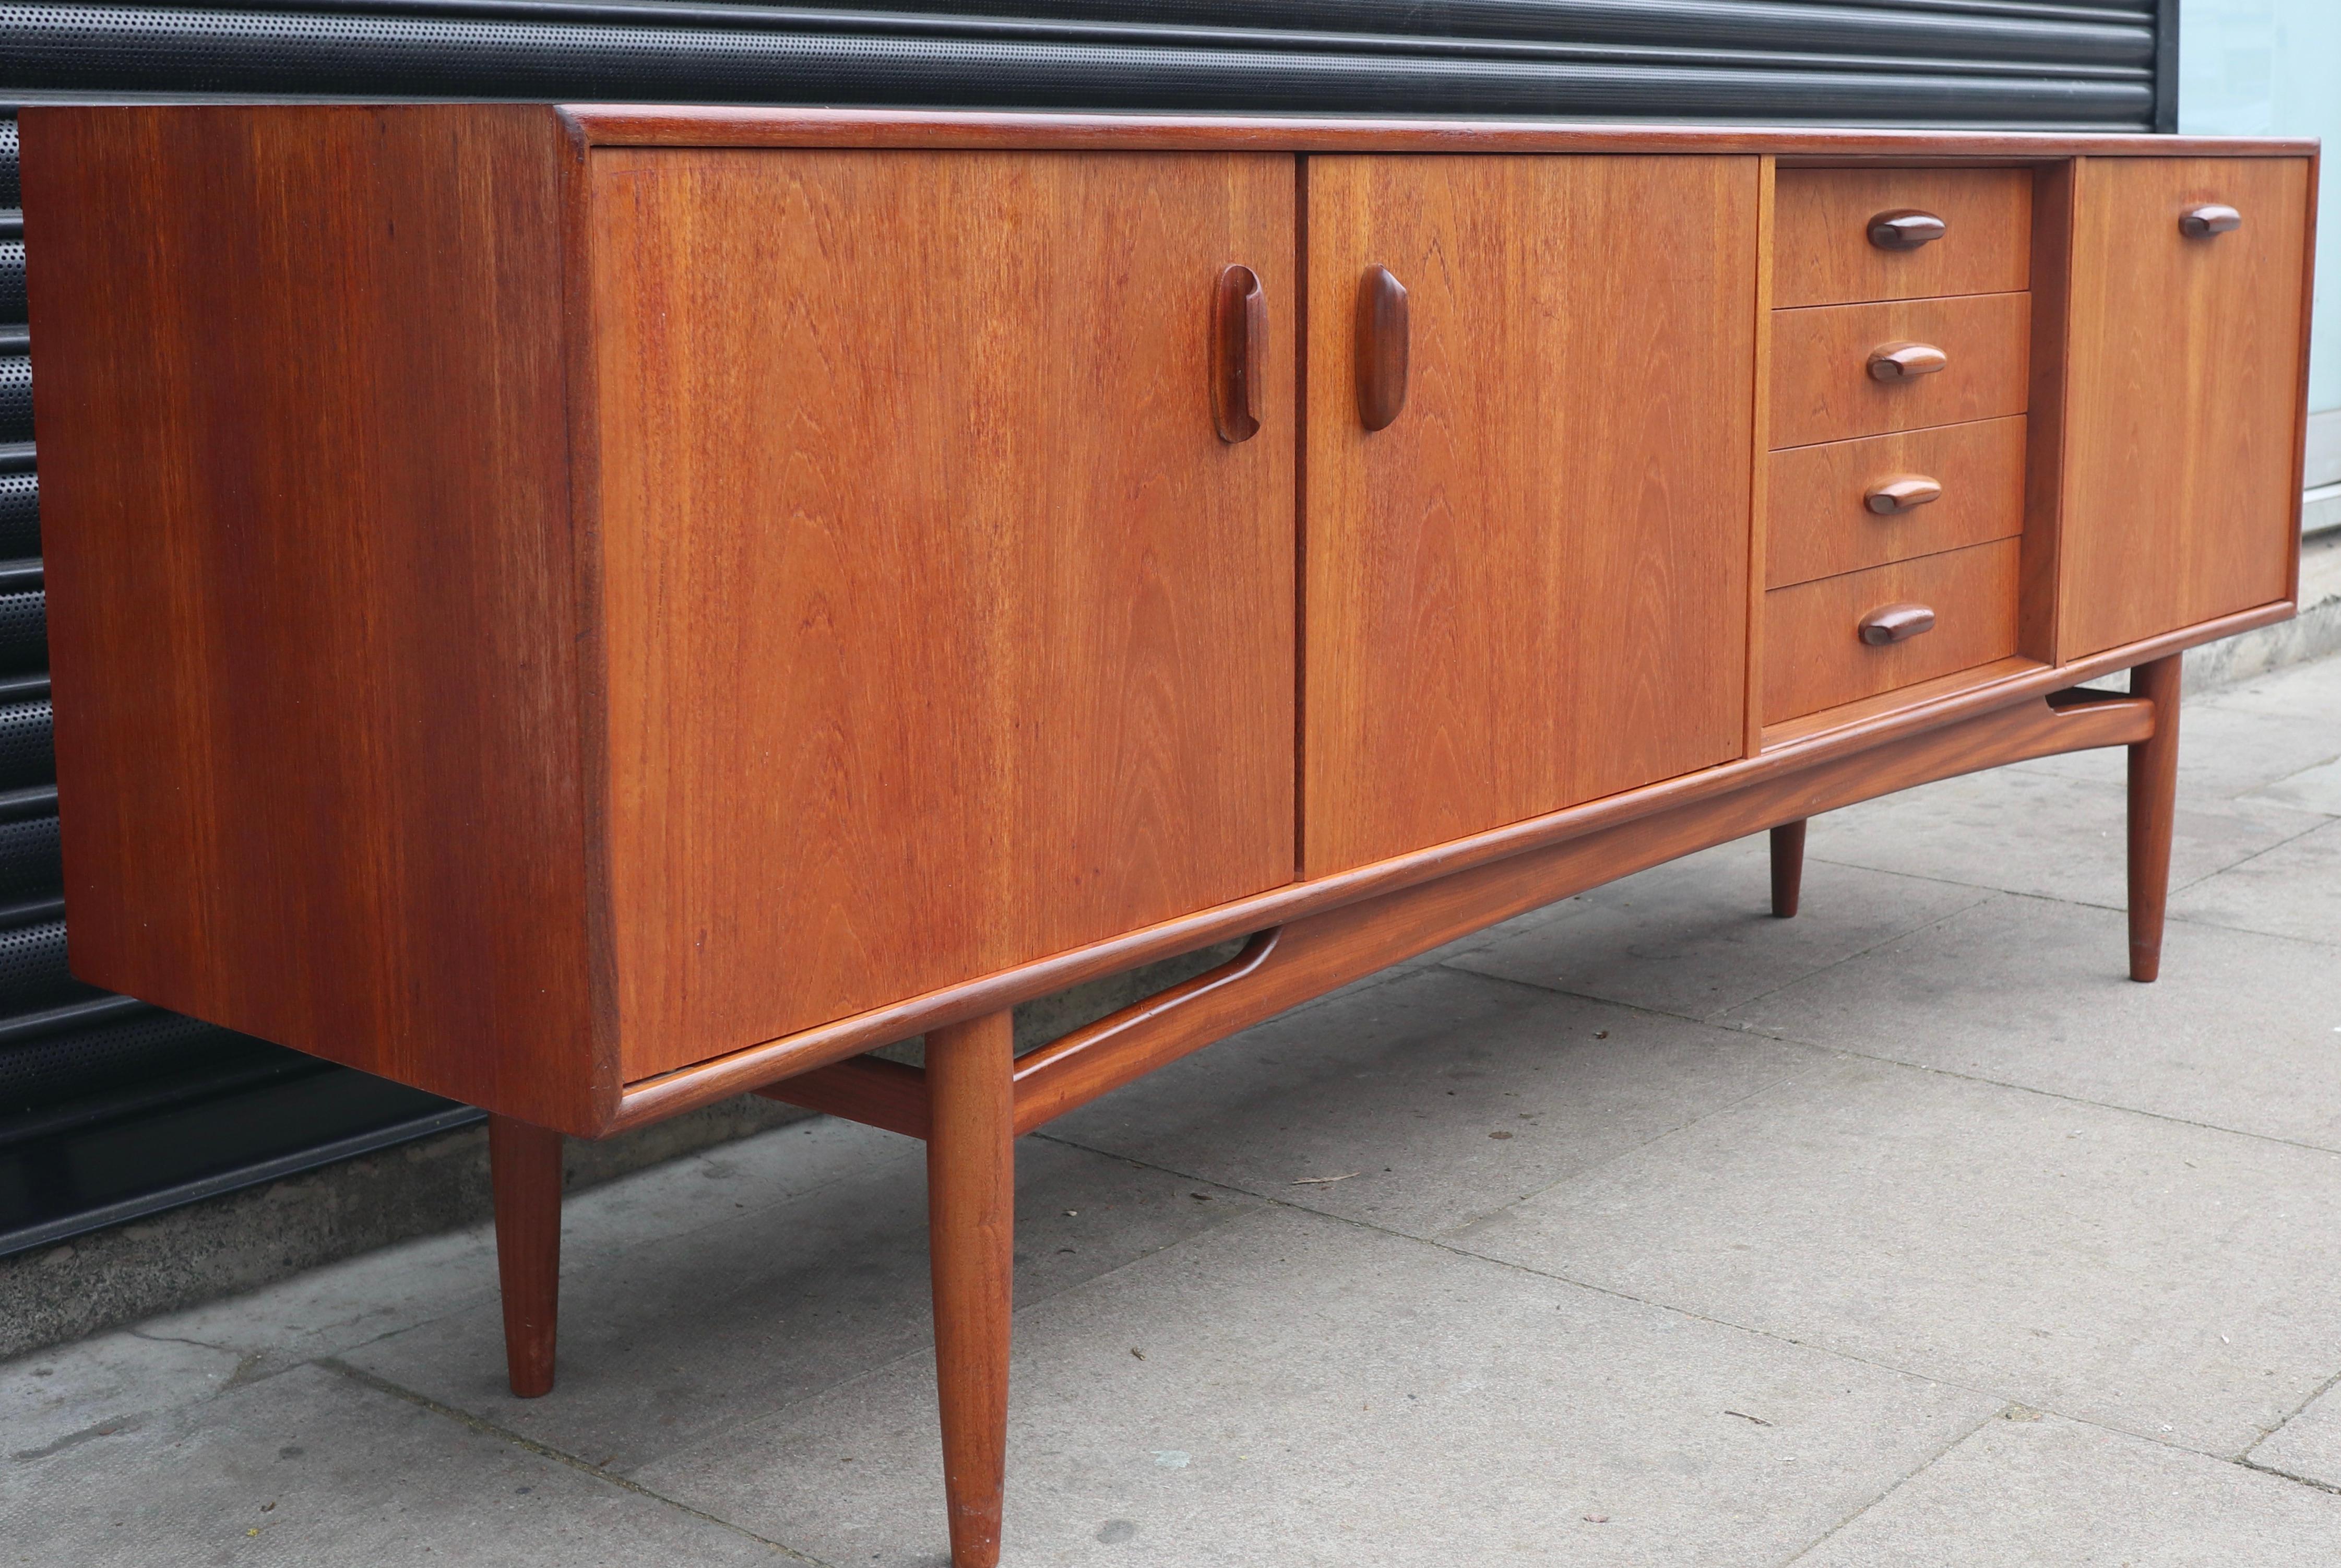 
This piece shows its quality with sculpted handles, beautiful dovetail joints and warm grades of golden Teak.
It also holds generous storage with 4 well-proportioned drawers, a double opening cupboard with a fixed shelf and a drop down